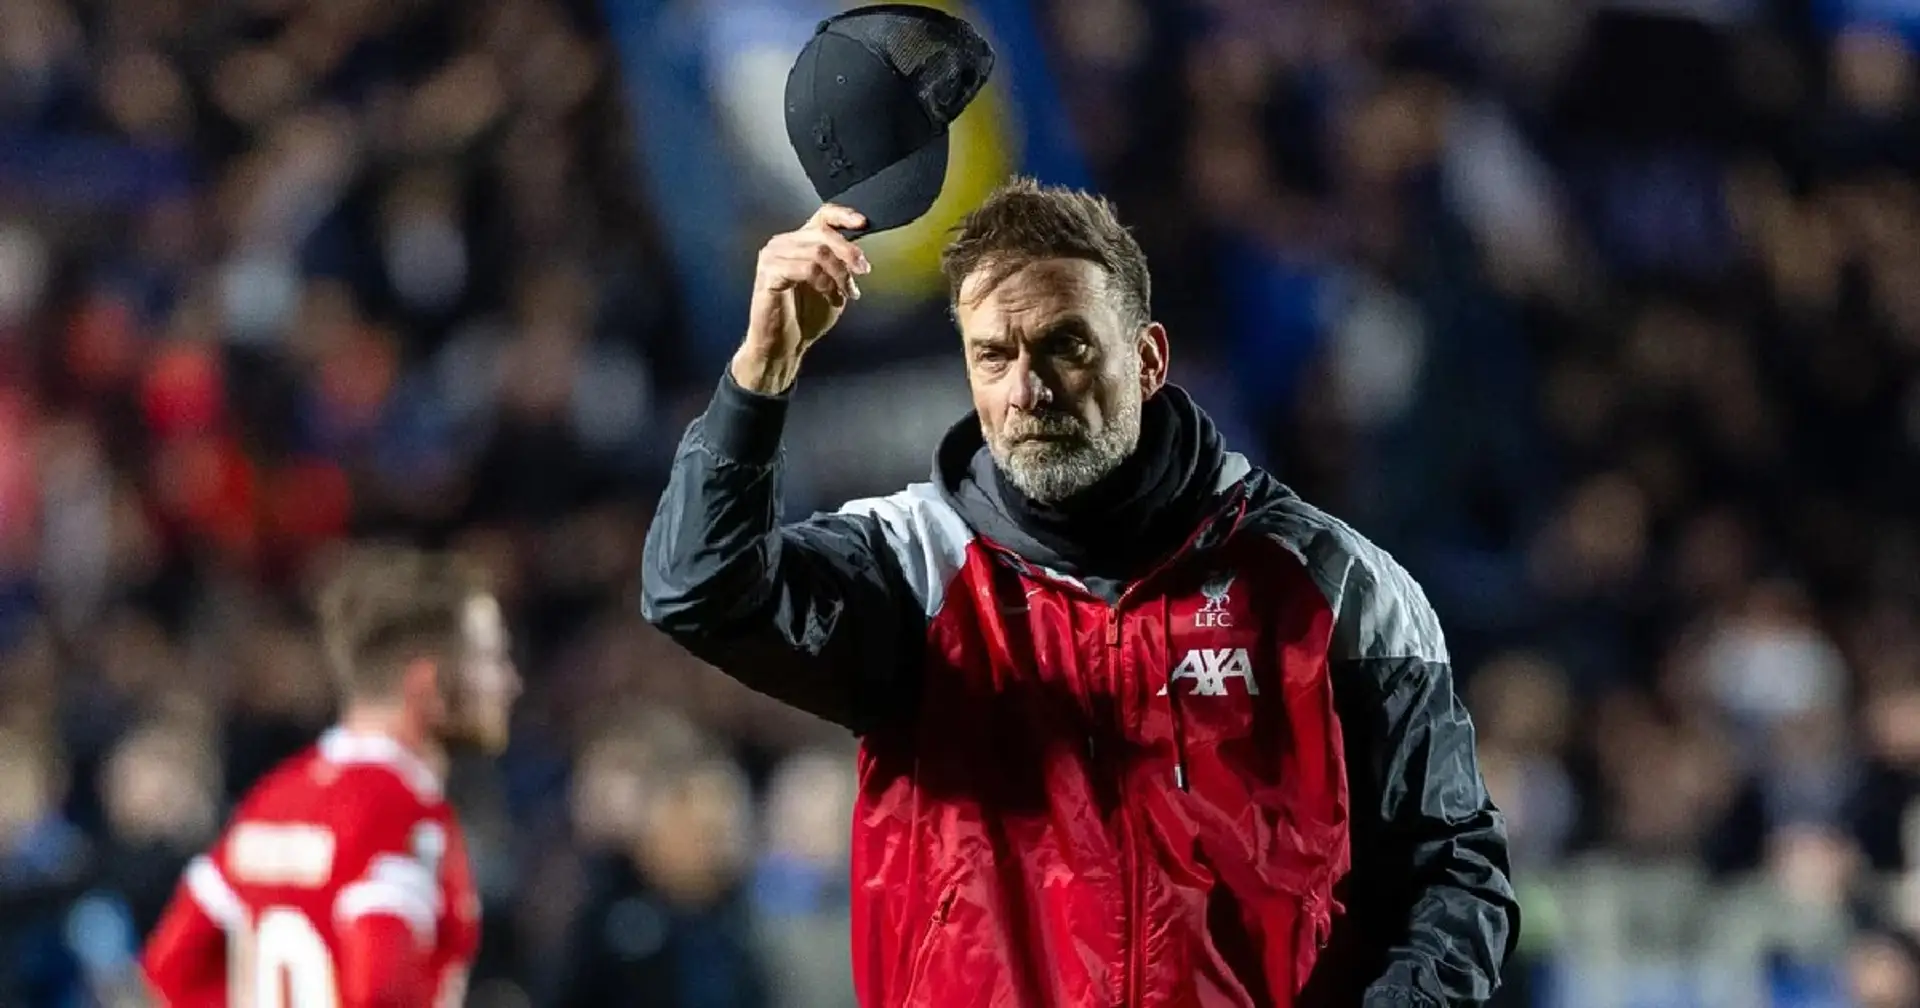 Spotted: Klopp tips his cap to Liverpool fans after his last European game for the club